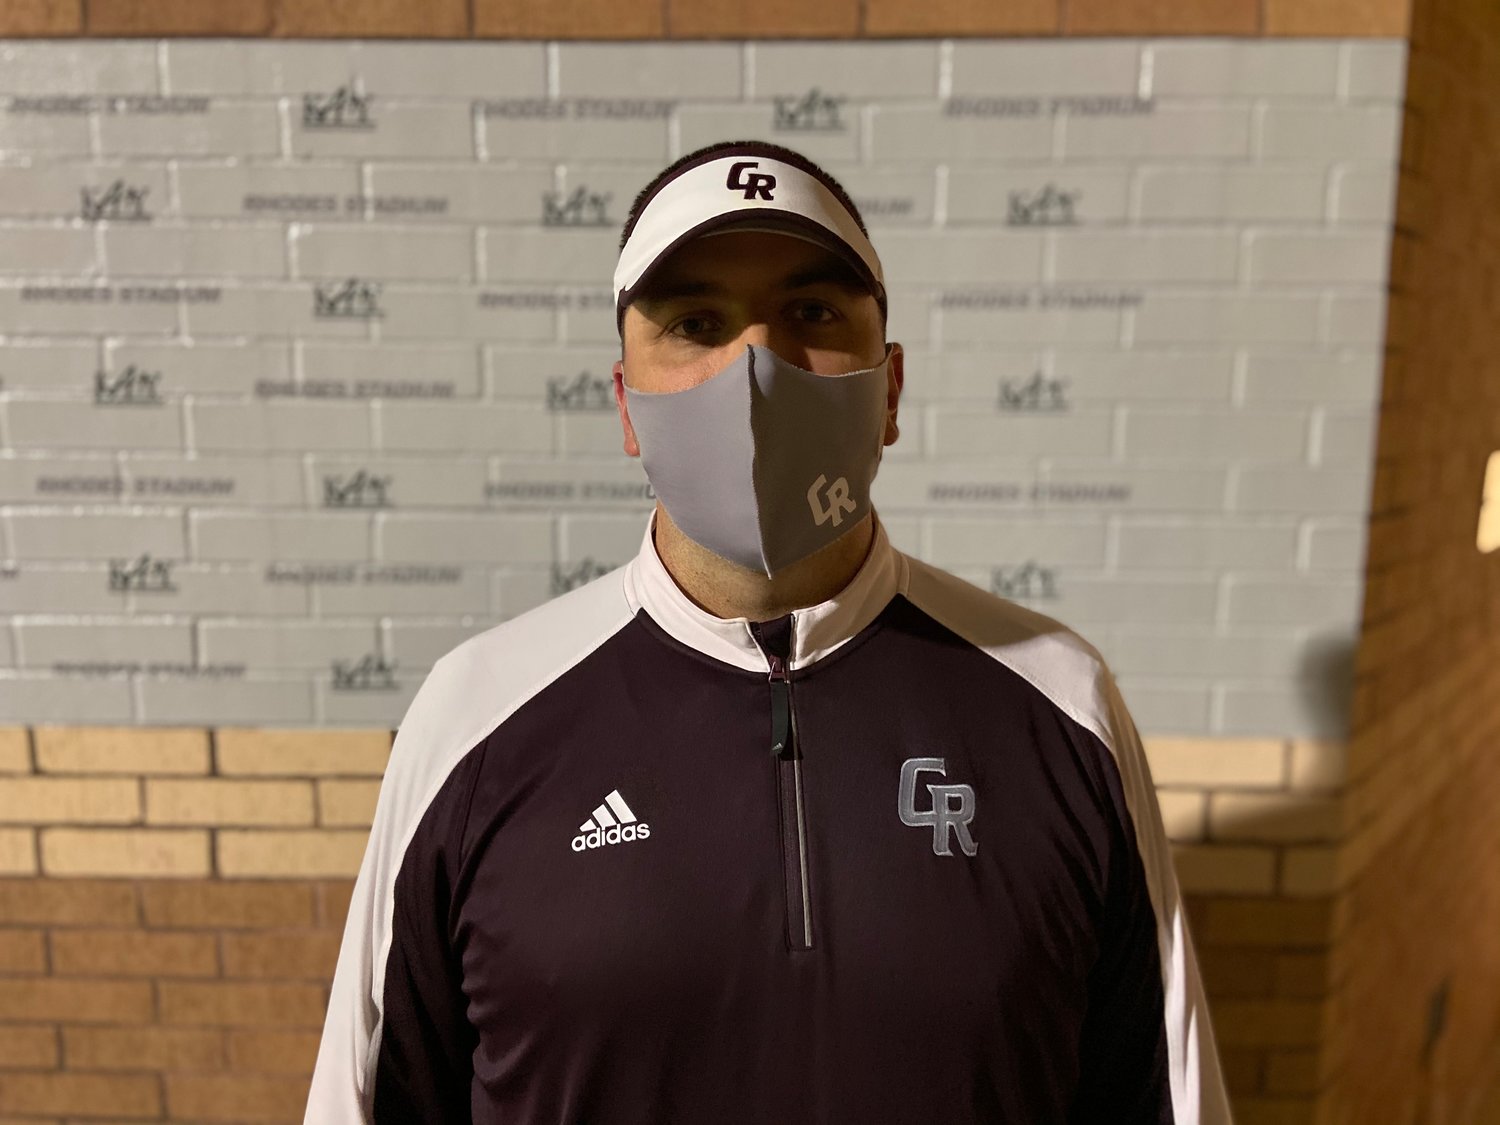 Second-year Cinco Ranch head coach Chris Dudley earned his first career head coaching win with a 21-17 decision against Mayde Creek on Oct. 16 at Rhodes Stadium.